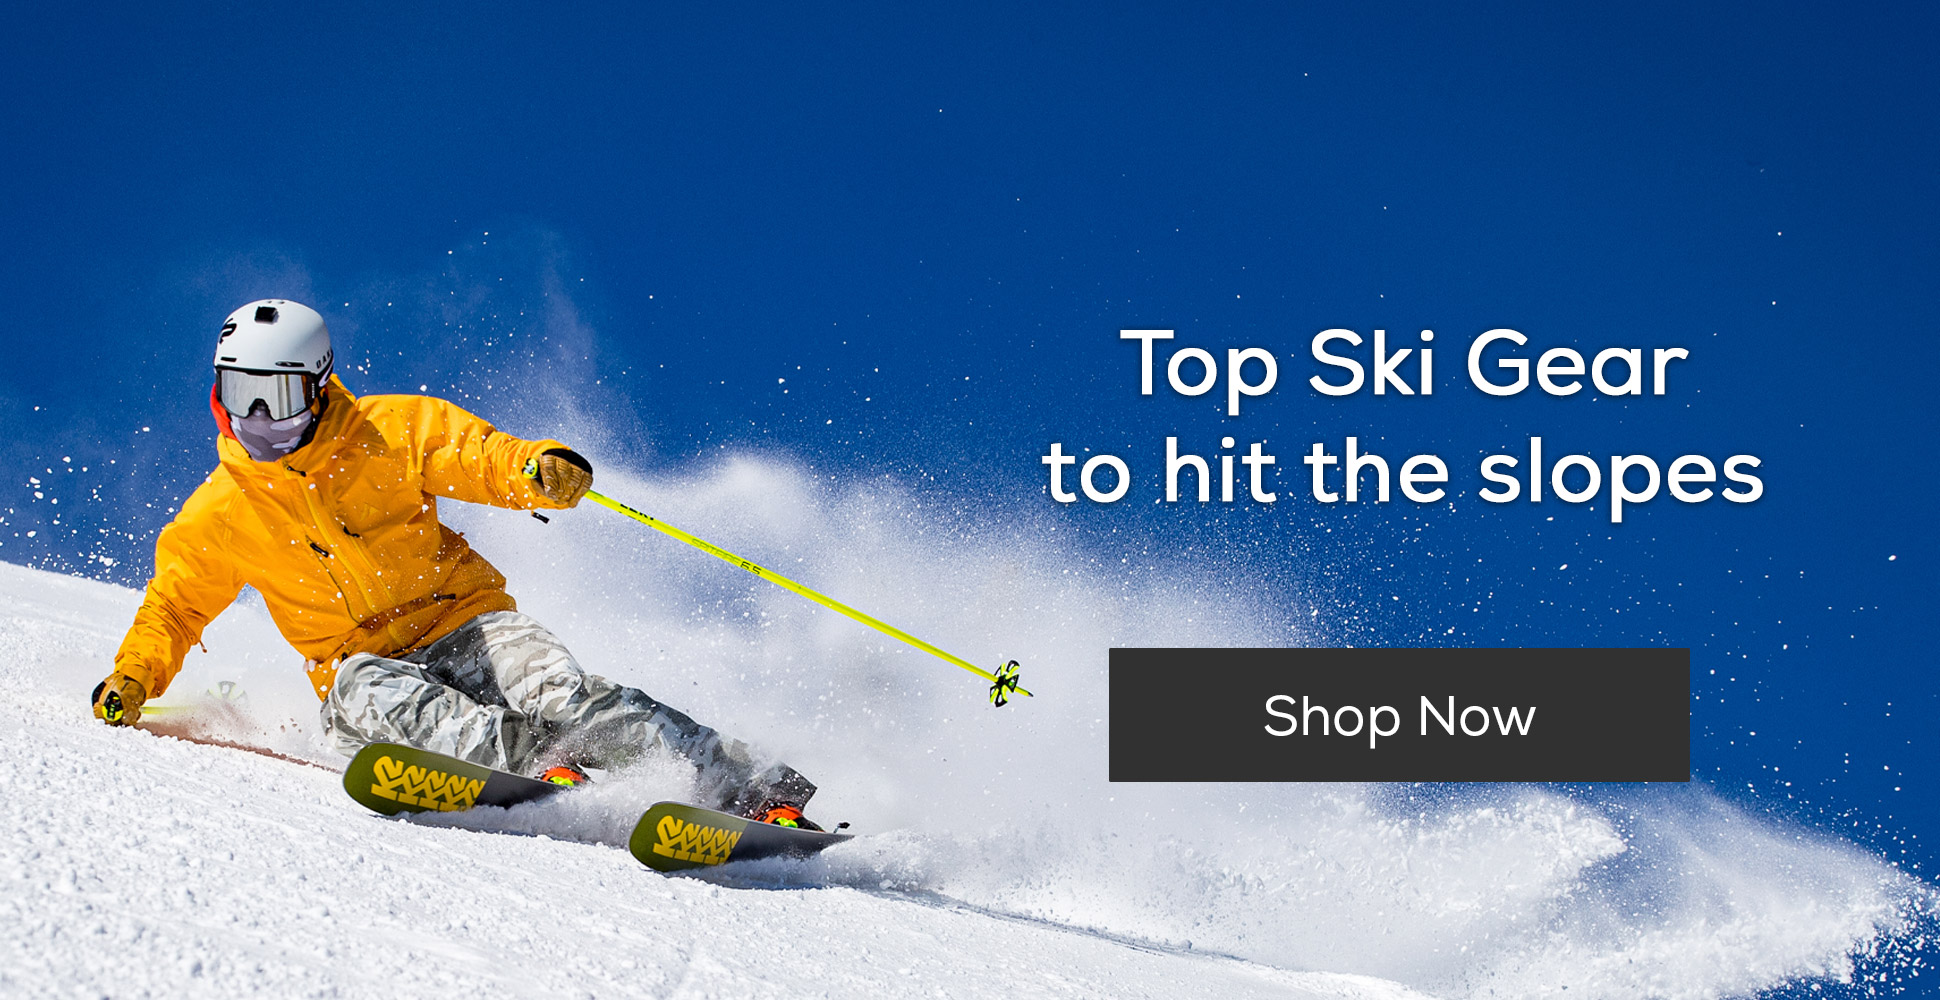 Top Ski Gear to hit the slopes